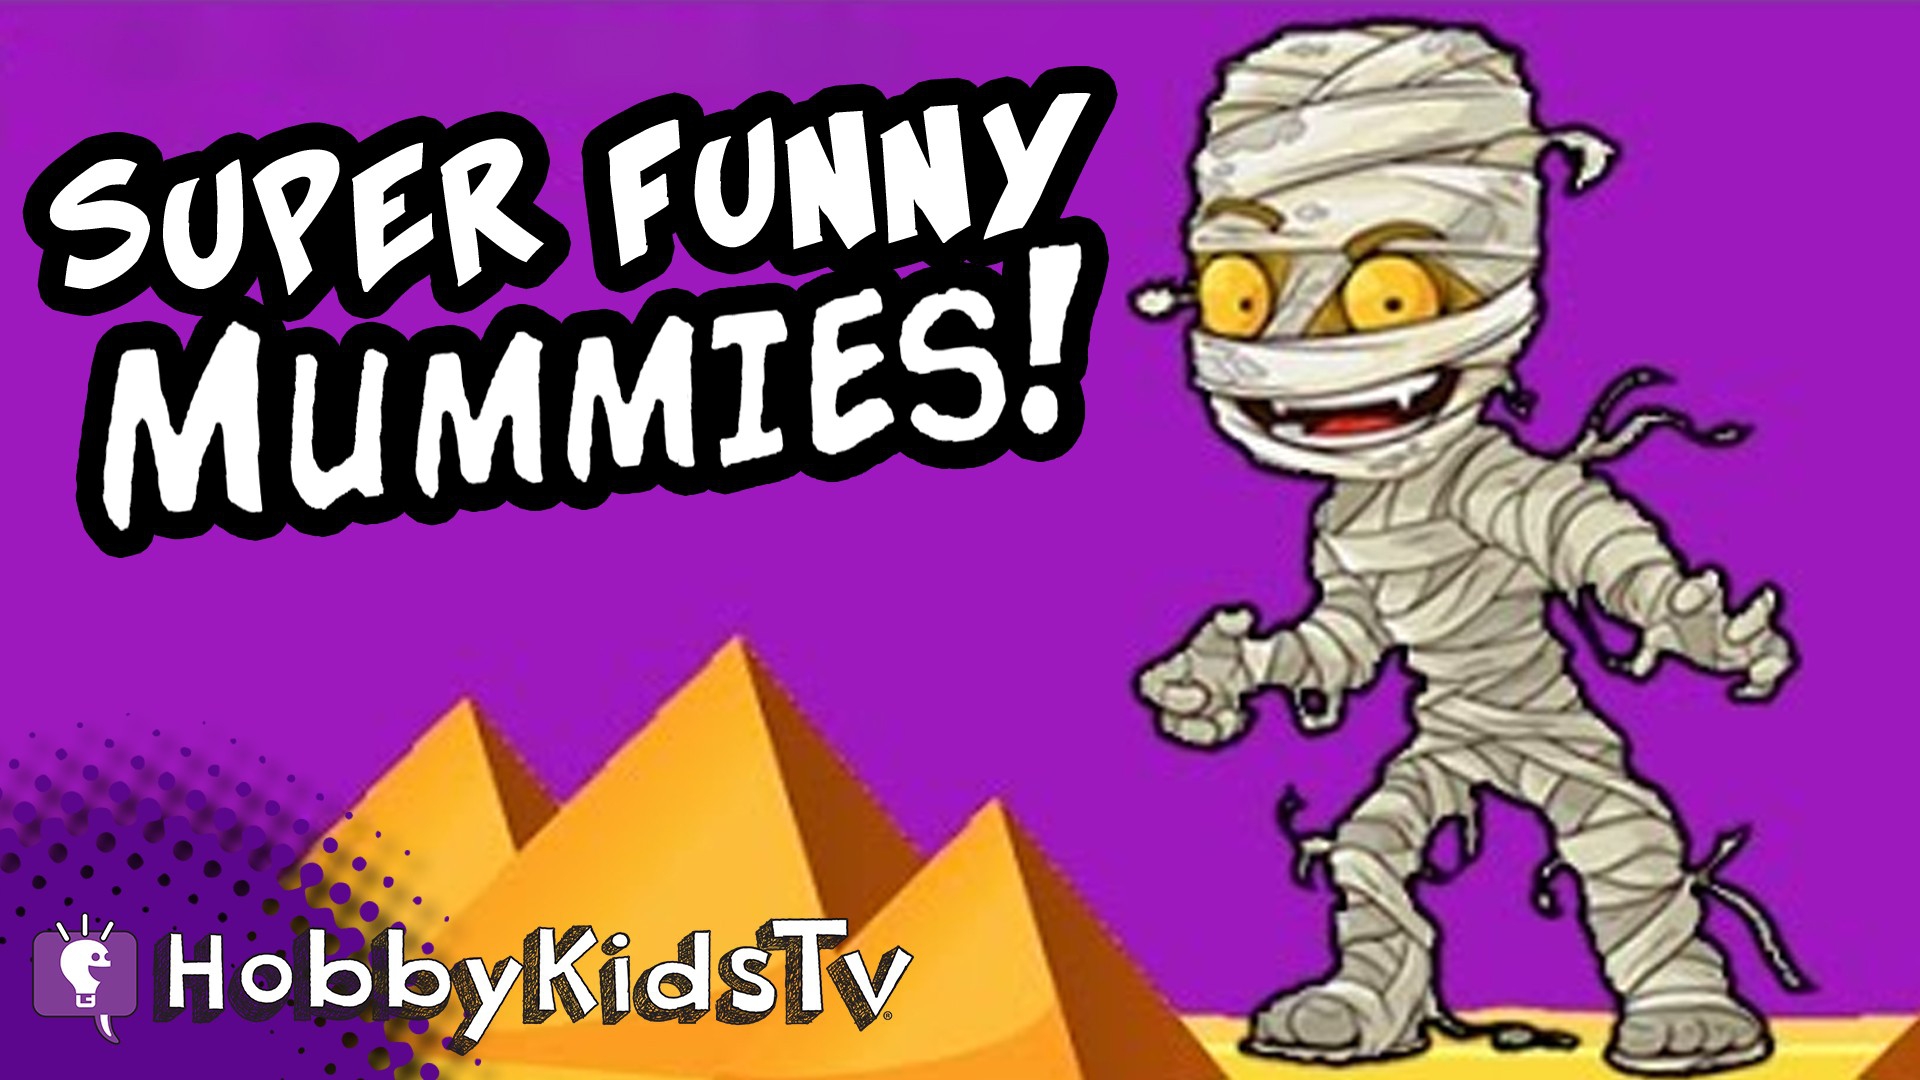 Watch Hobbykidstv S1 E18 Funny Mummy Surprises 2019 Online For Free The Roku Channel Roku - hobby kids playing roblox bigfoot